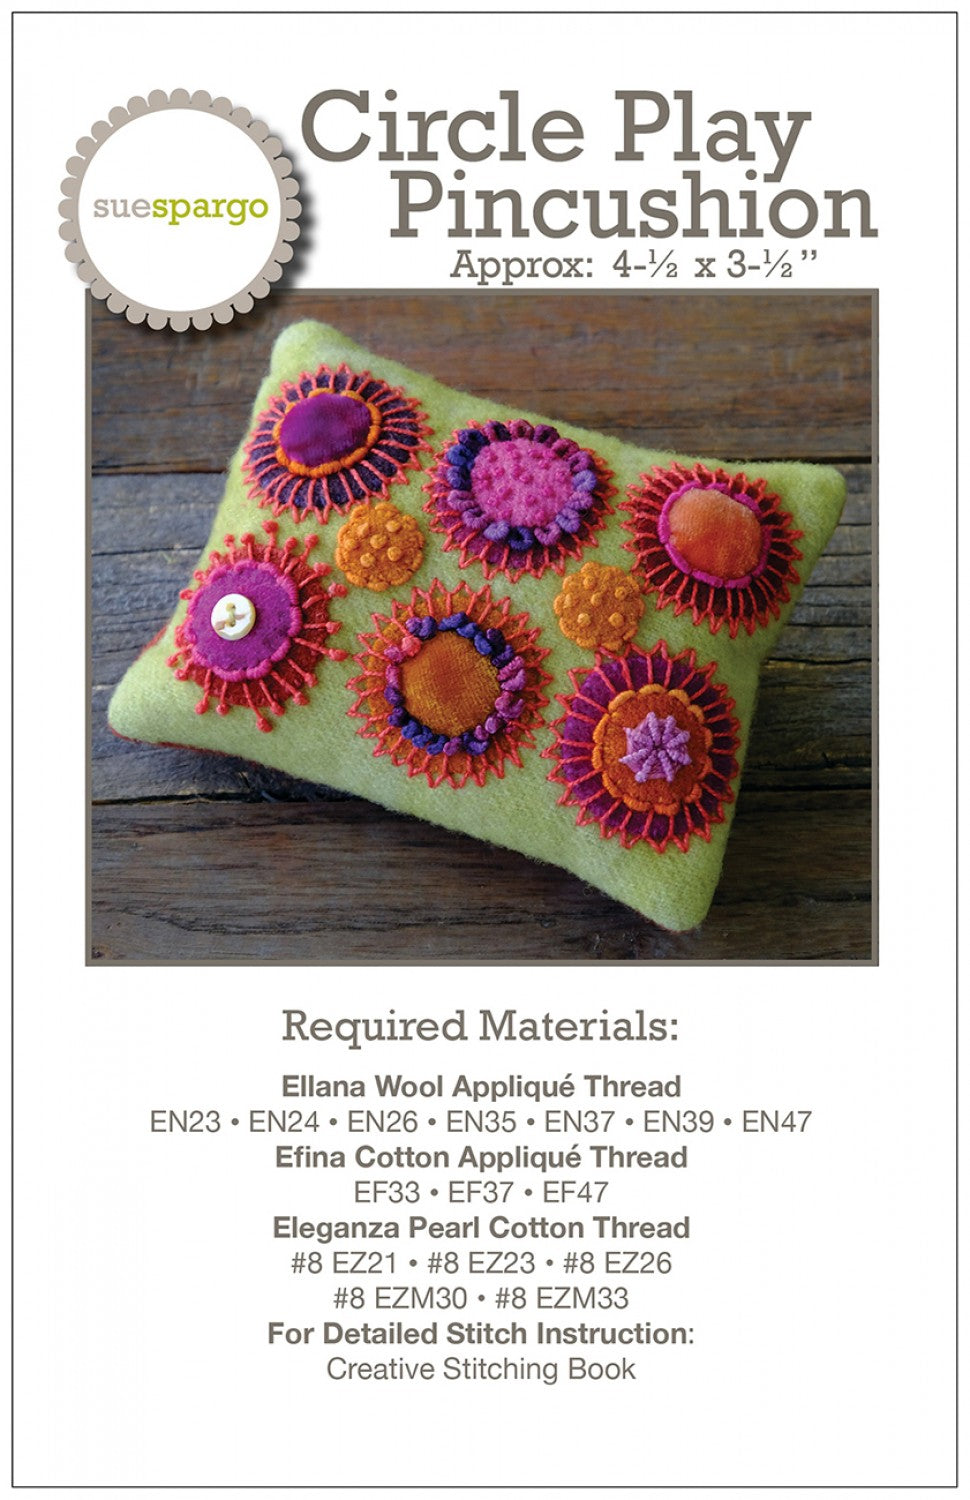 Circle Play Pincushion - Applique, Embroidery, and Sewing Pattern by Sue Spargo of Folk Art Quilts